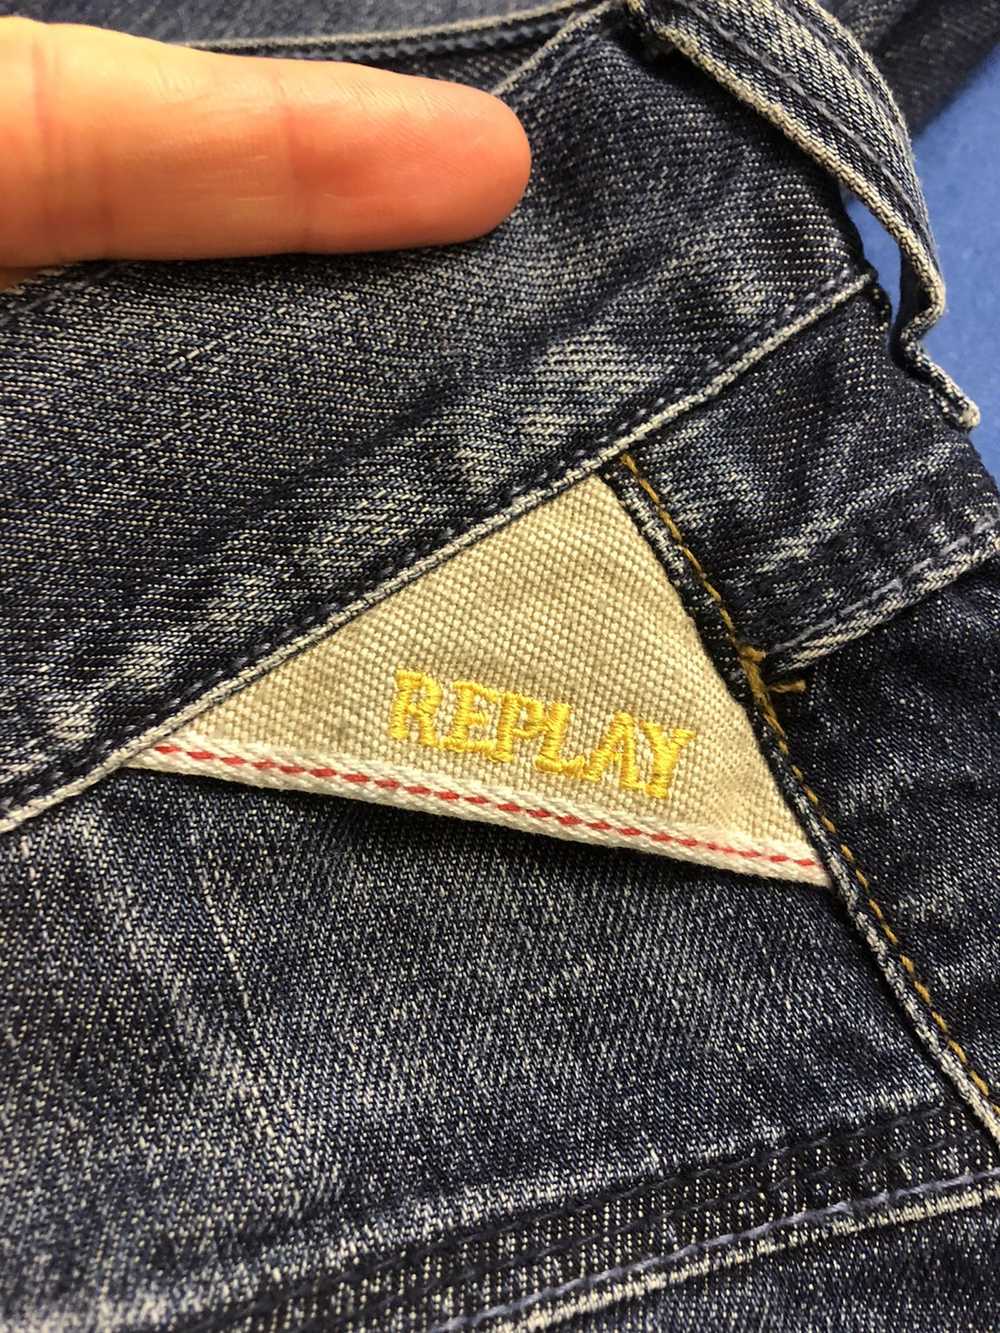 Replay × Vintage REPLAY BLUE JEANS ITALY RARE VIN… - image 7